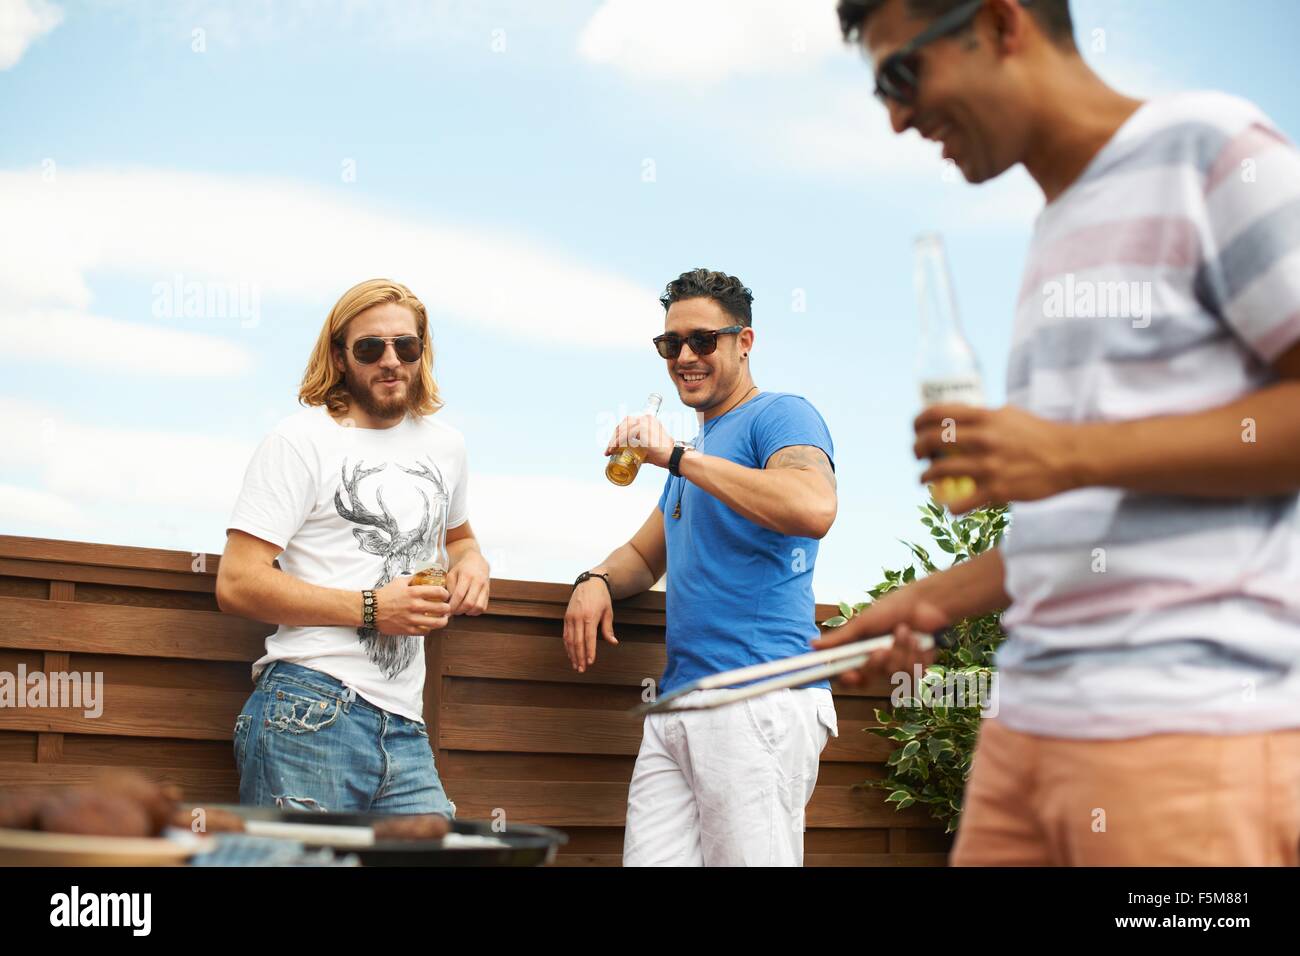 Three male friends drinking beer and barbecuing at rooftop barbecue Stock Photo